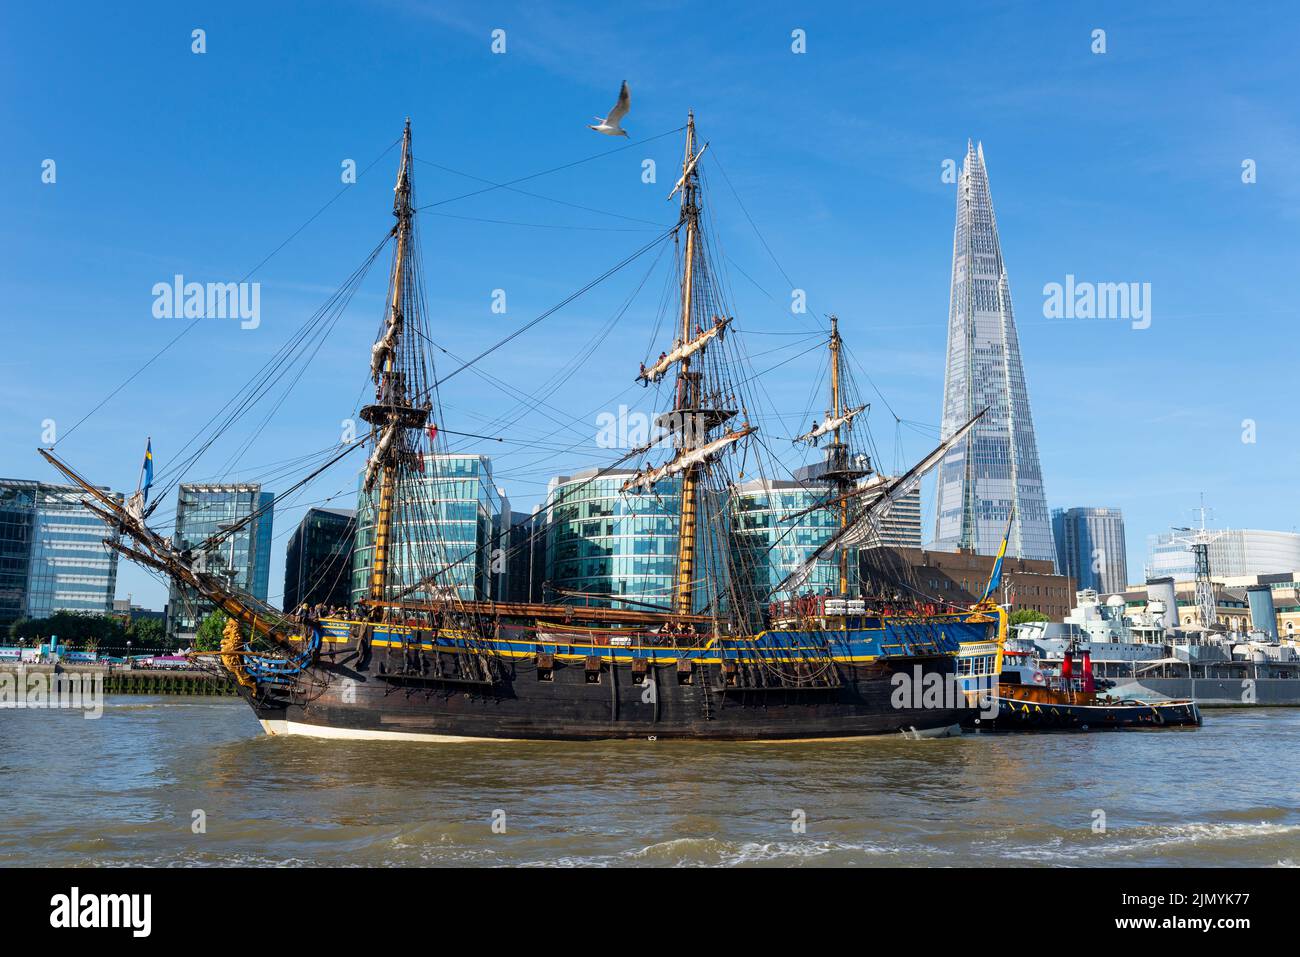 Tower Bridge, London, UK. 8th Aug, 2022. Gotheborg of Sweden is a sailing replica of the Swedish East Indiaman Gotheborg I, launched in 1738, and is visiting London to welcome visitors on board. The wooden replica ship was launched in 2003 and last visited London in 2007. It has navigated up the River Thames in the morning to pass under the opened Tower Bridge before turning and passing back under and heading for Thames Quay in Canary Wharf, where it will be open to visitors. Pushed by tug, passing HMS Belfast, The Shard and More London Stock Photo